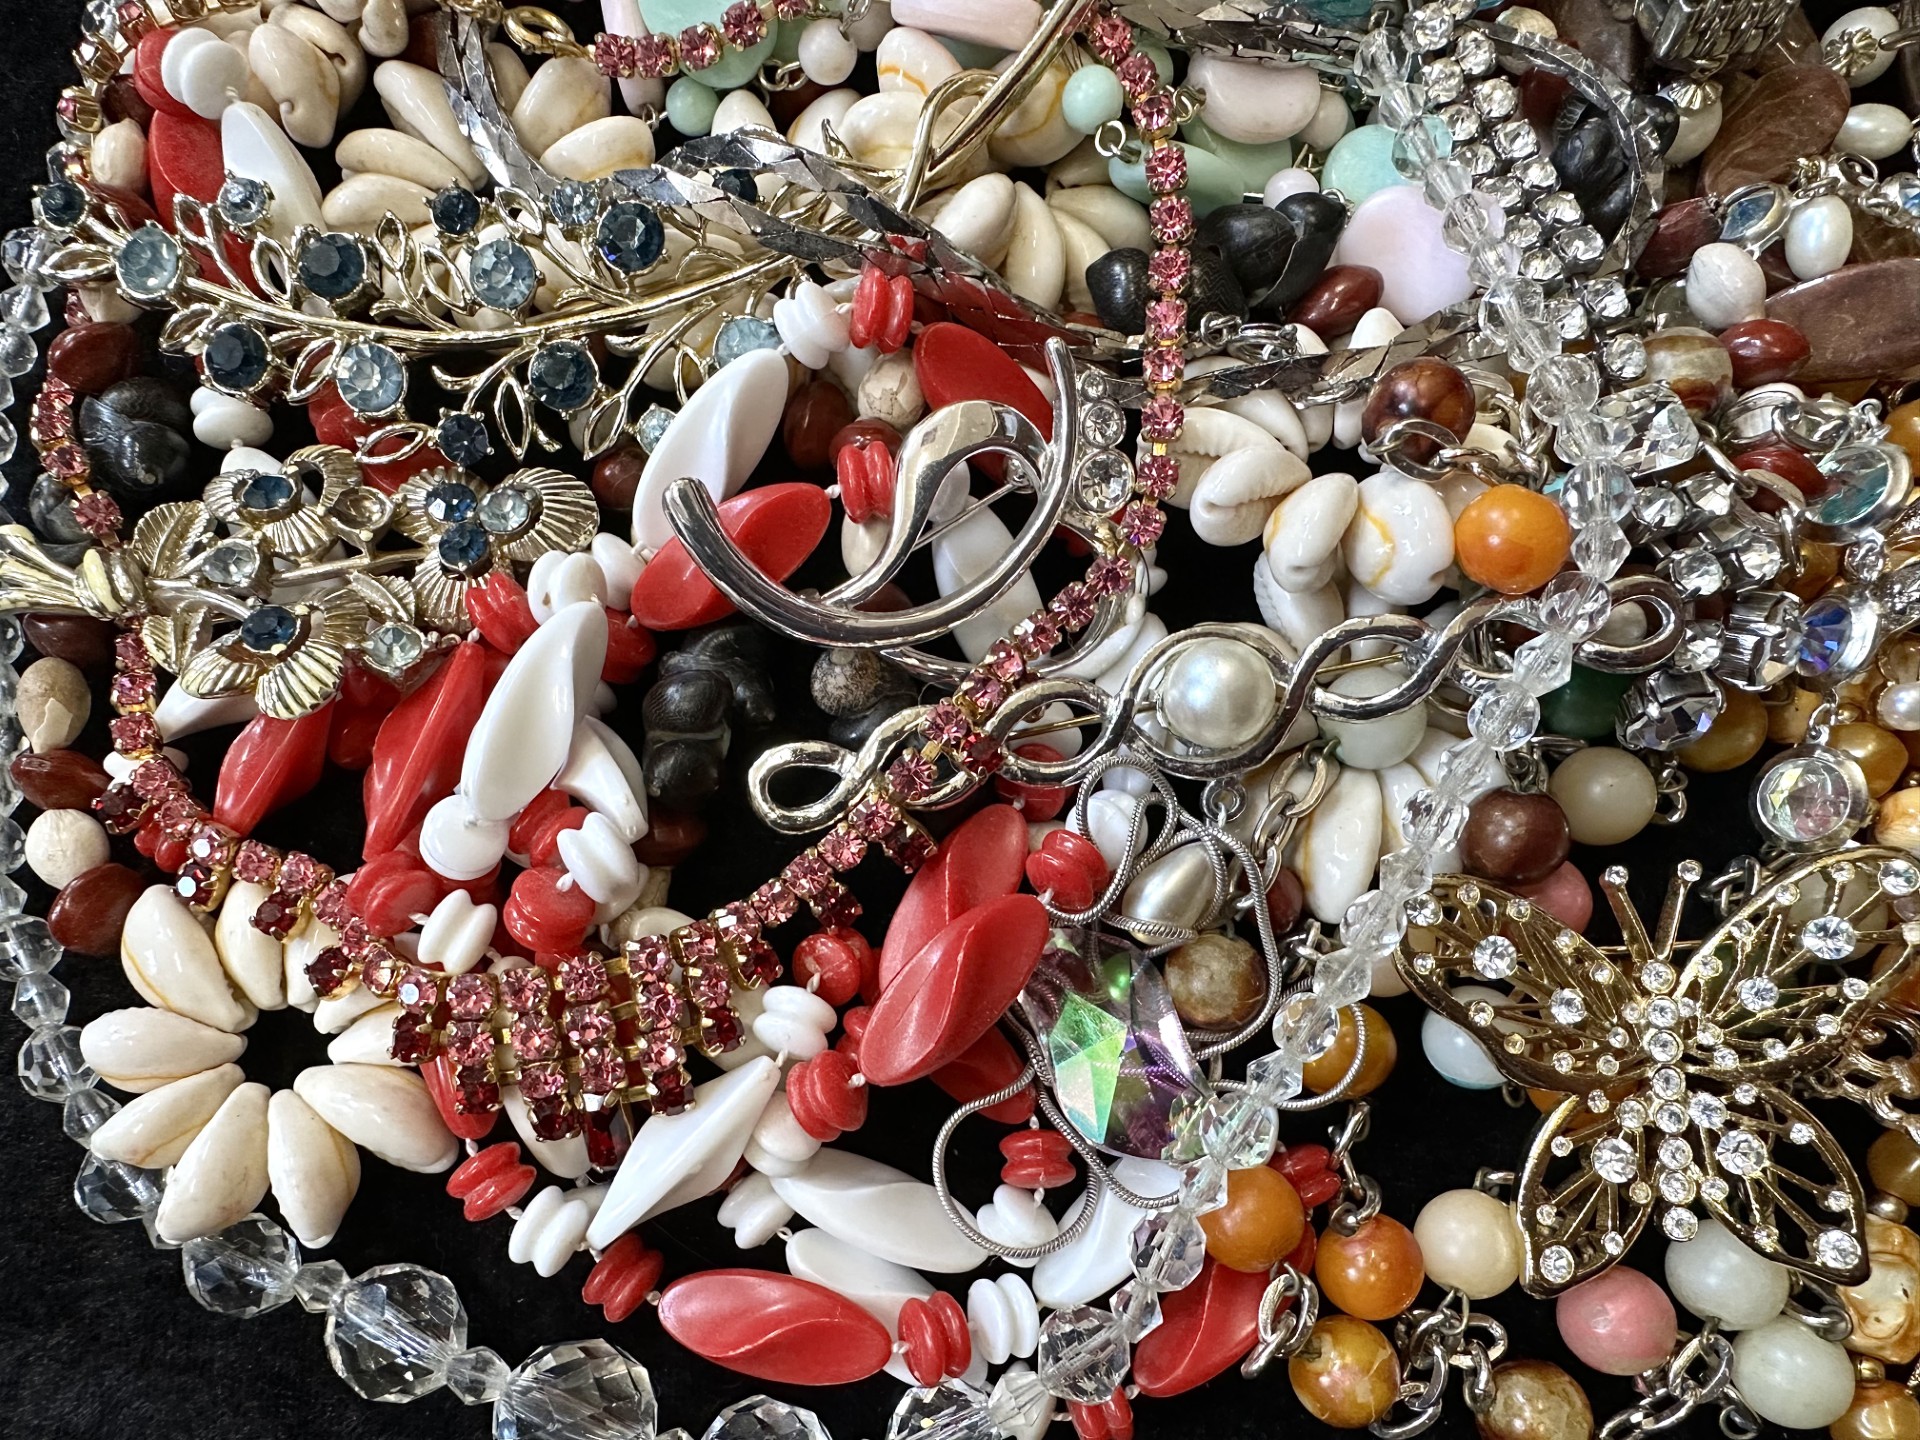 Box of Vintage Costume Jewellery, including brooches, beads, shell necklaces, pendants, watches, - Image 2 of 3